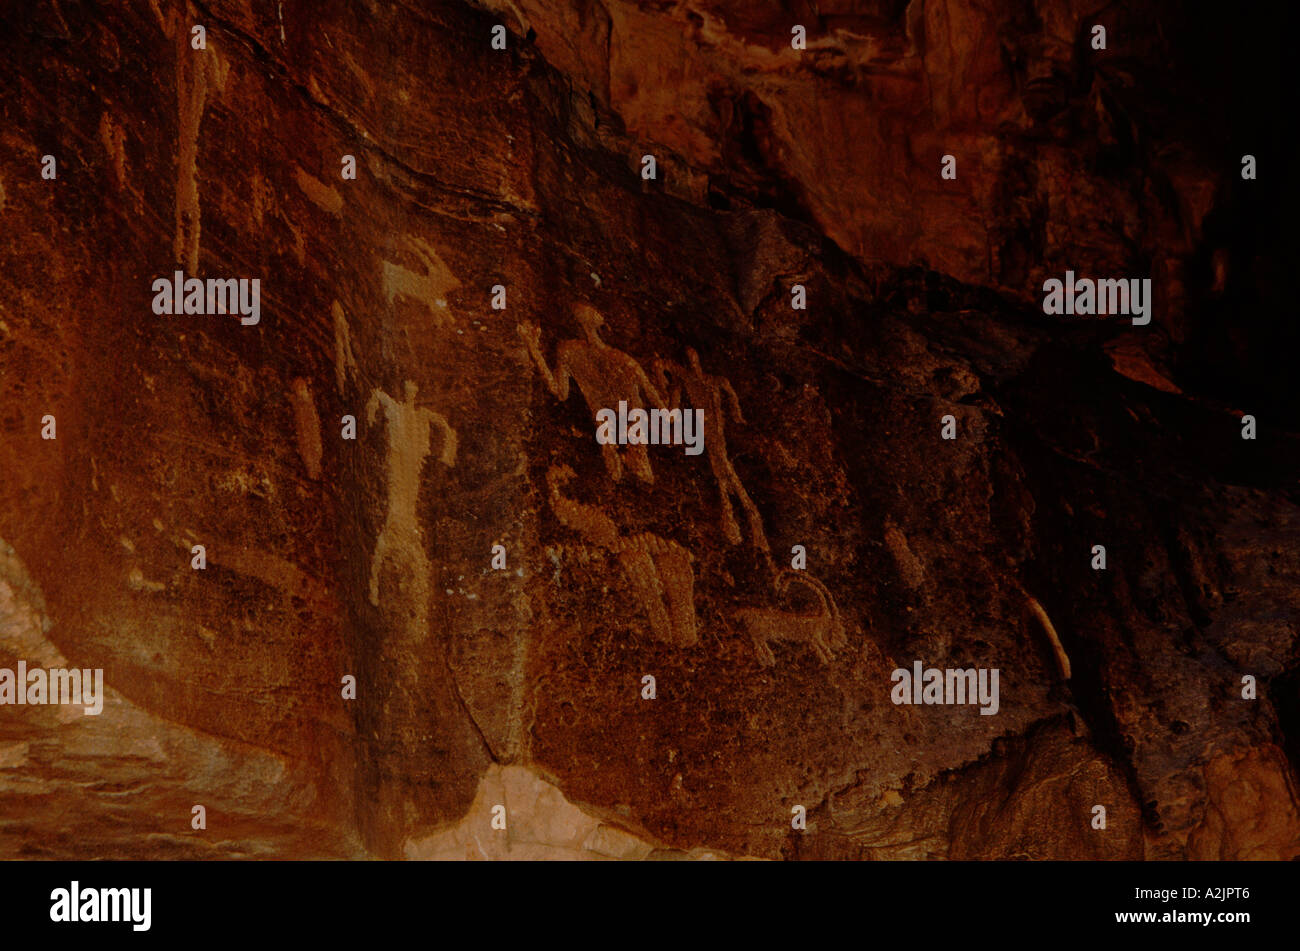 Asia, Jordan, Wadi Rum, Rock art depicting hunting scenes left by nomads and hunters from 4th centruy BC Stock Photo